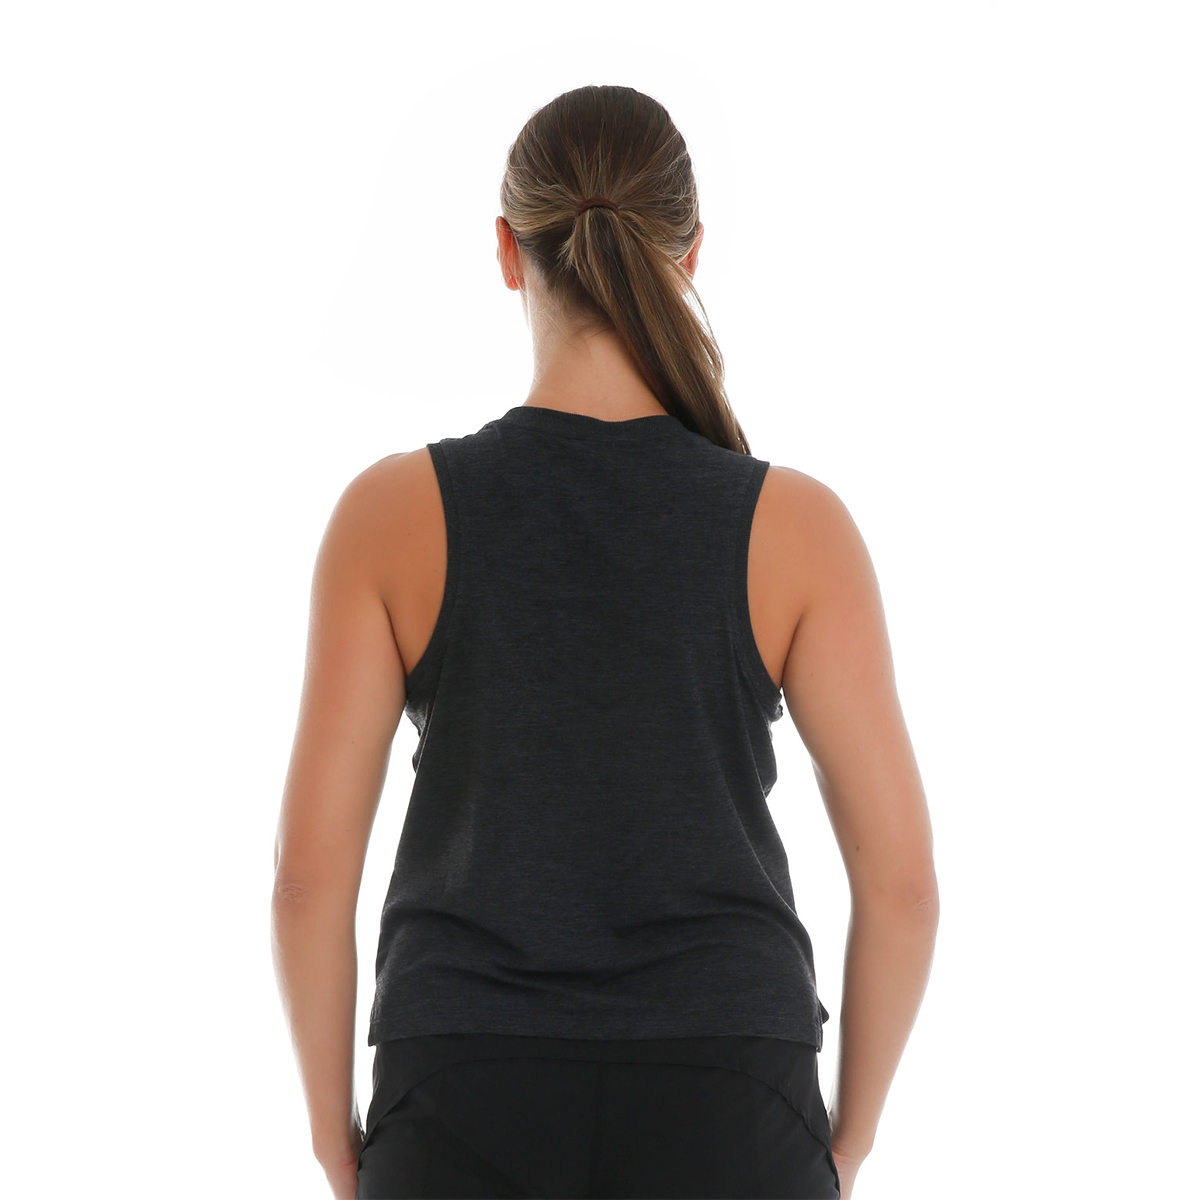 F2R Ultimate Comfort Tank, , large image number null